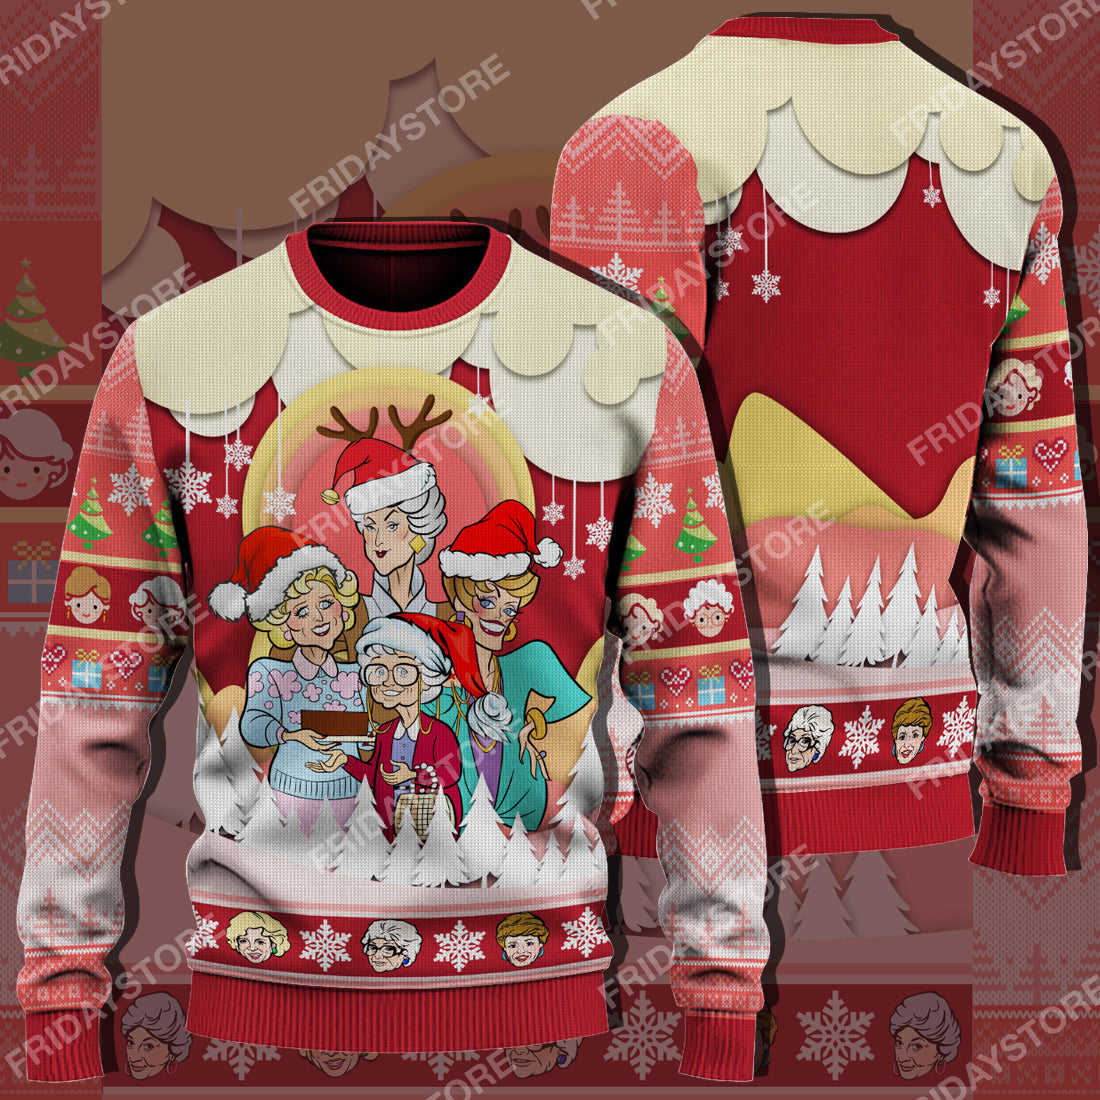 Unifinz Golden Girls Ugly Sweater Golden Girls Happy Christmas Sweater Awesome Golden Girls Christmas Sweater 2022